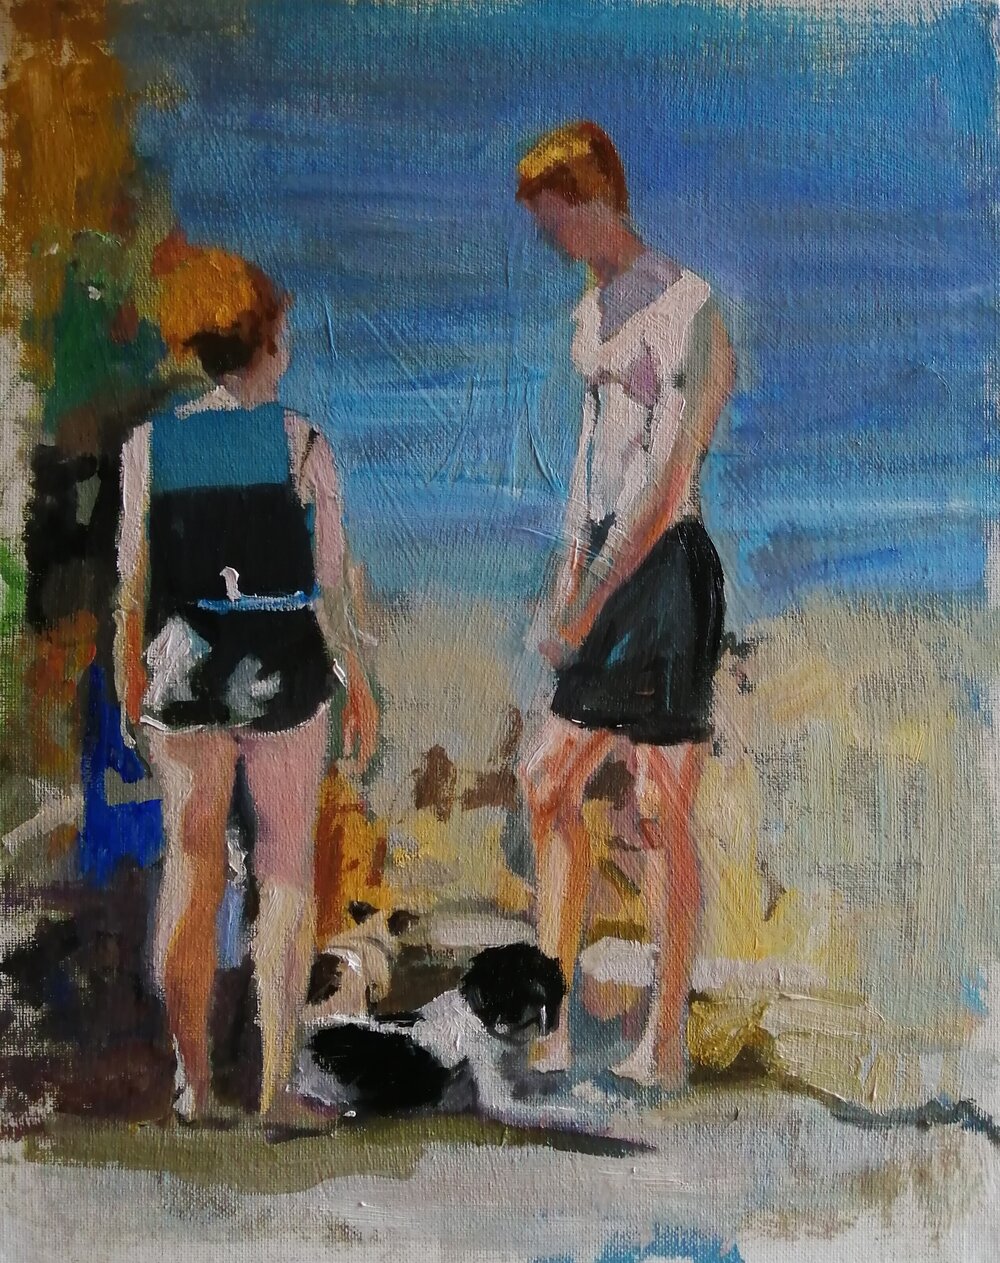  People and dogs at the beach  Oil on board  28x36 cms  SOLD  A glimpse into the lives of two young people with their dogs on a hot summer day. 